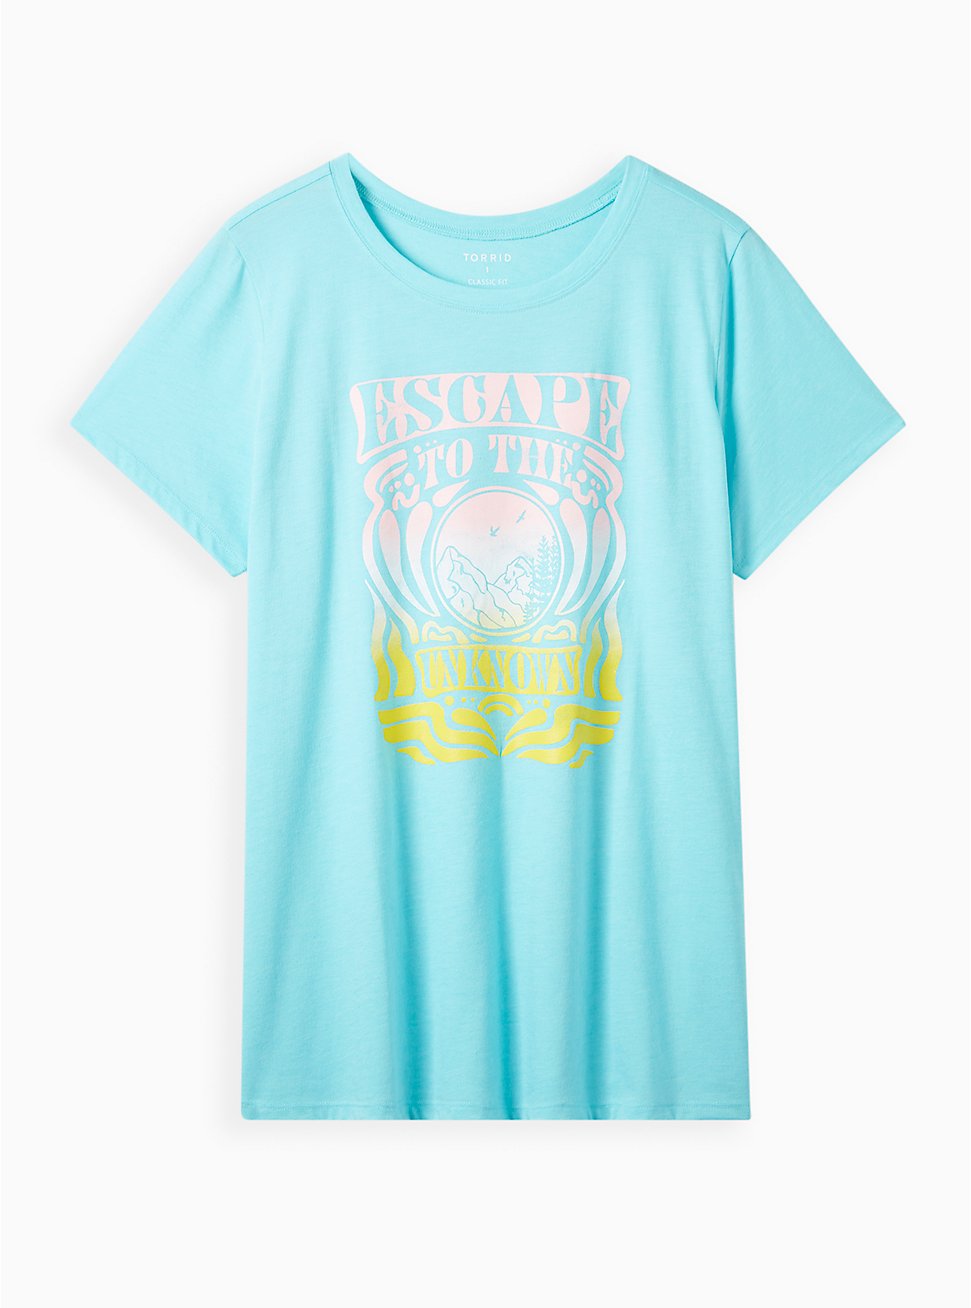 Everyday Tee - Signature Jersey Escape Blue, BLUE RADIANCE, hi-res